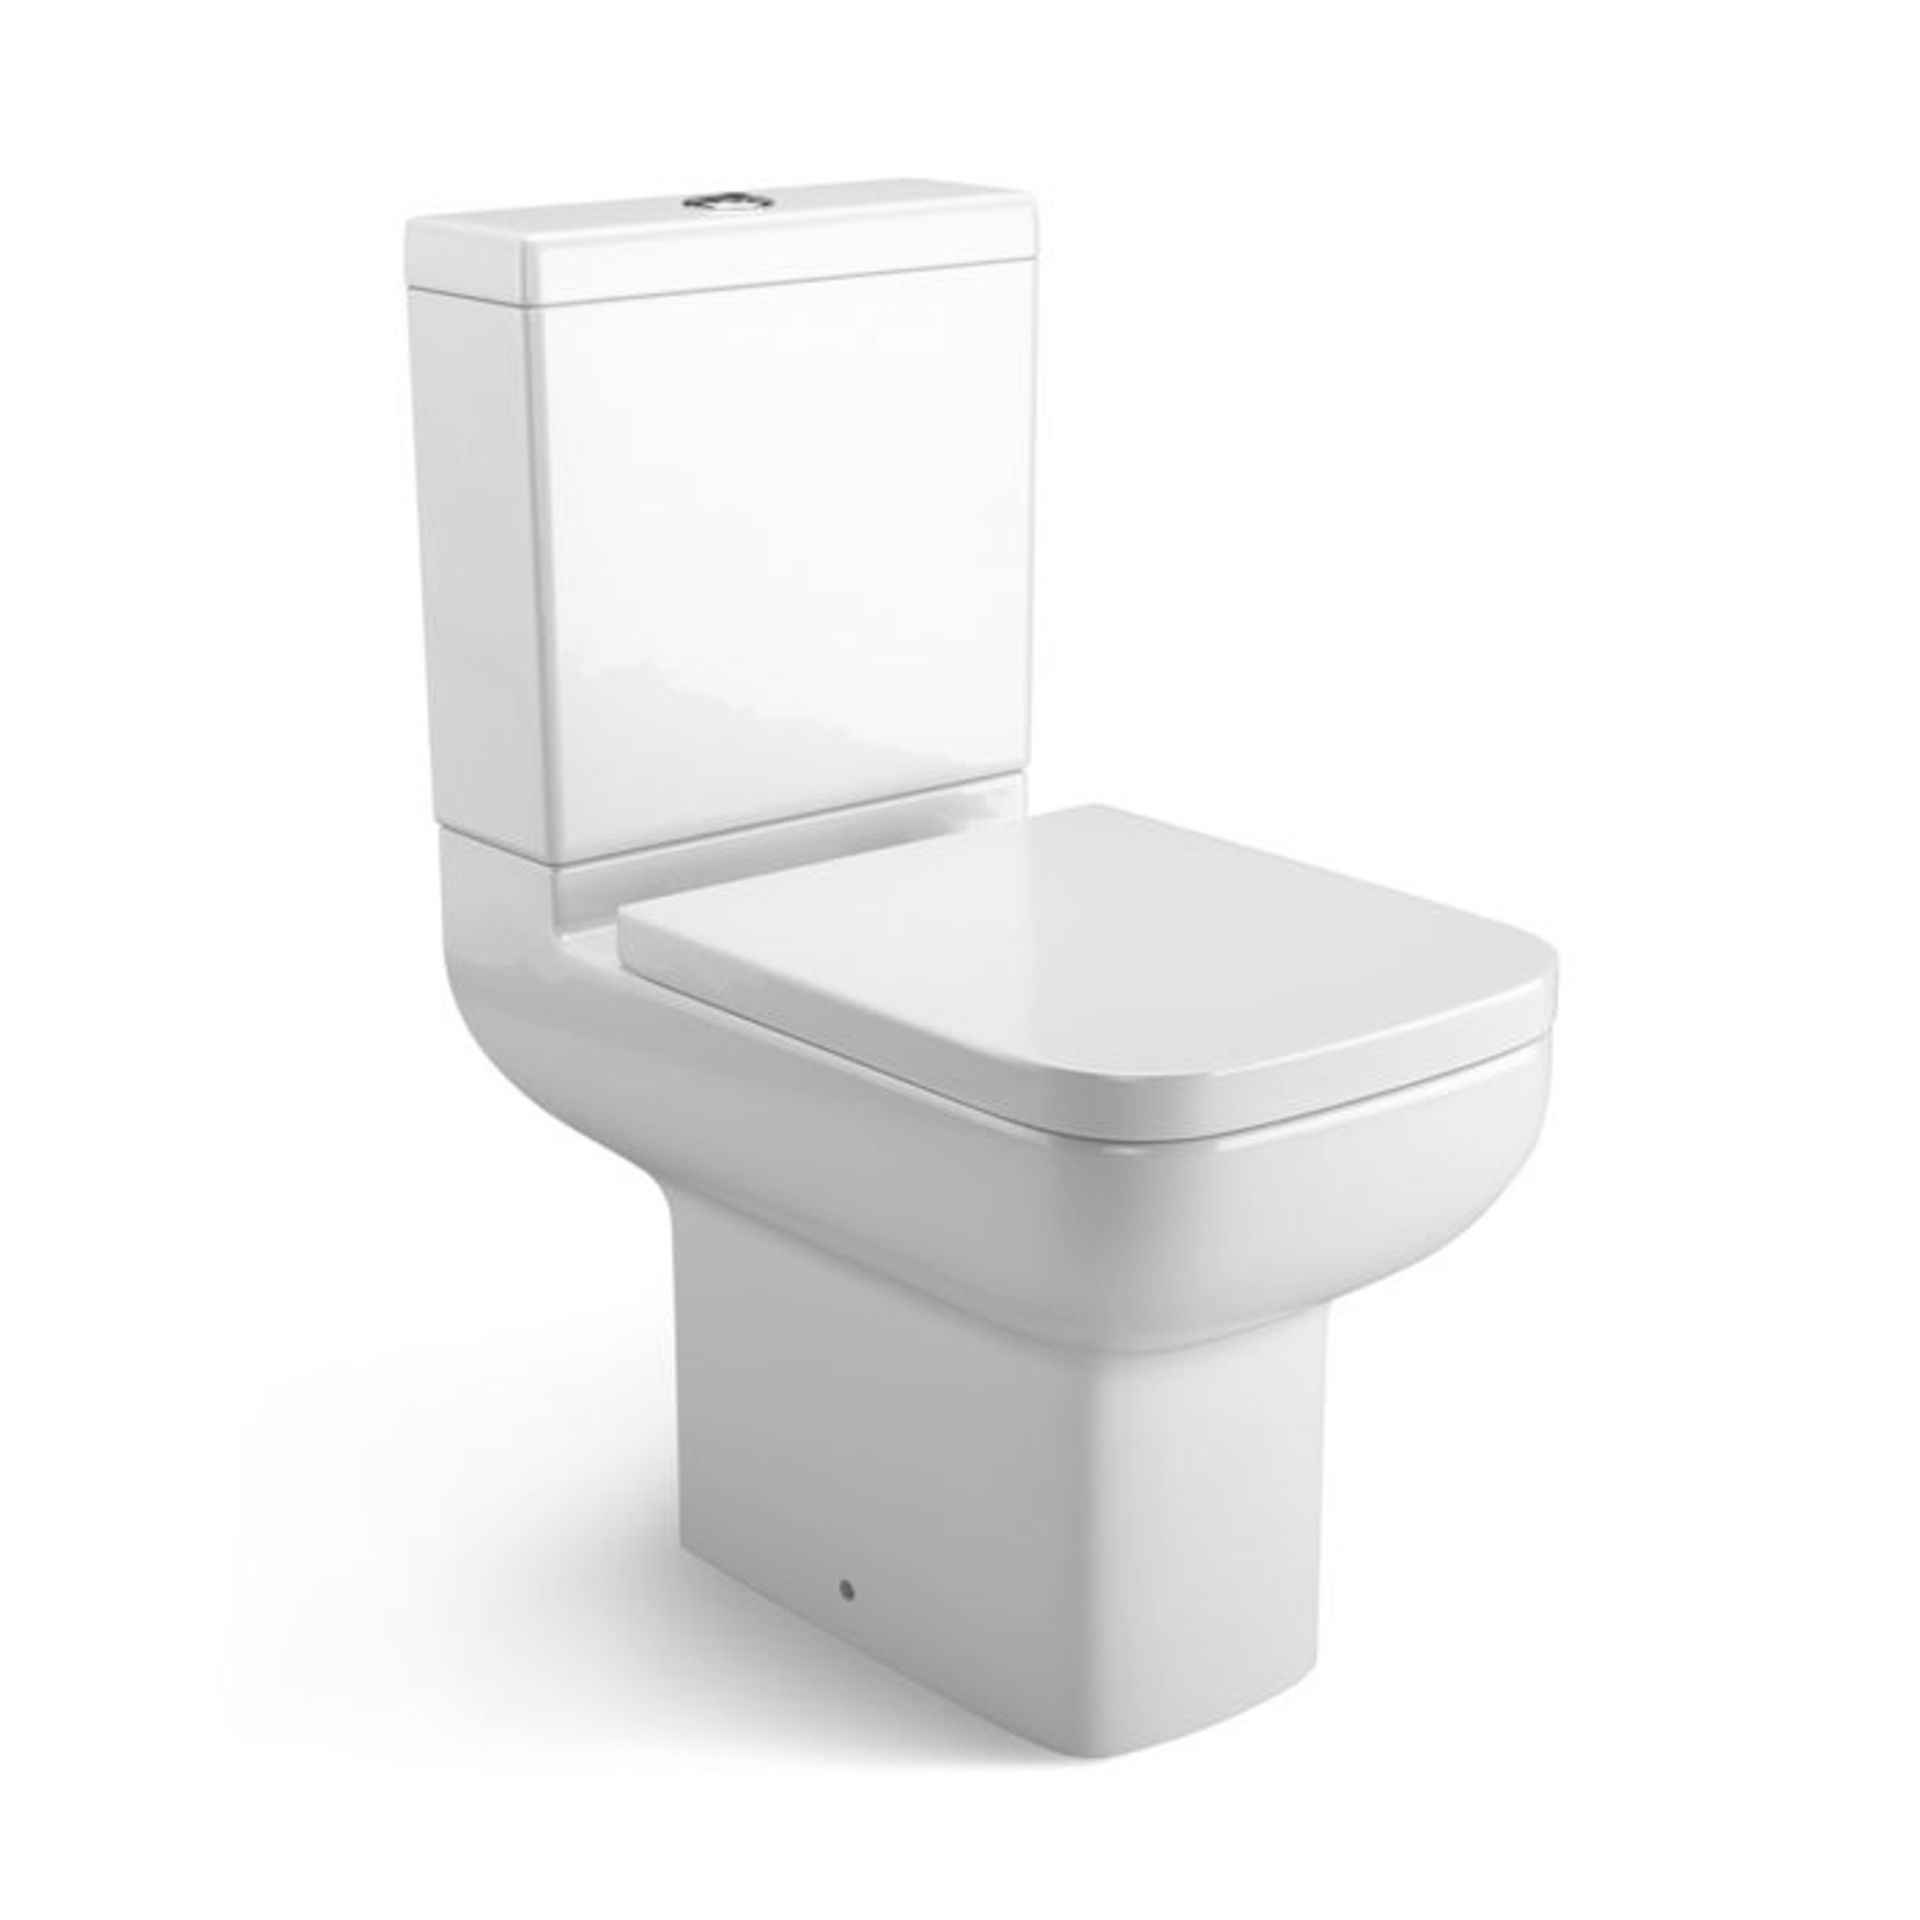 (AL22) Short Projection Close Coupled Toilet & Cistern inc Soft Close Seat. We love this because the - Image 3 of 4